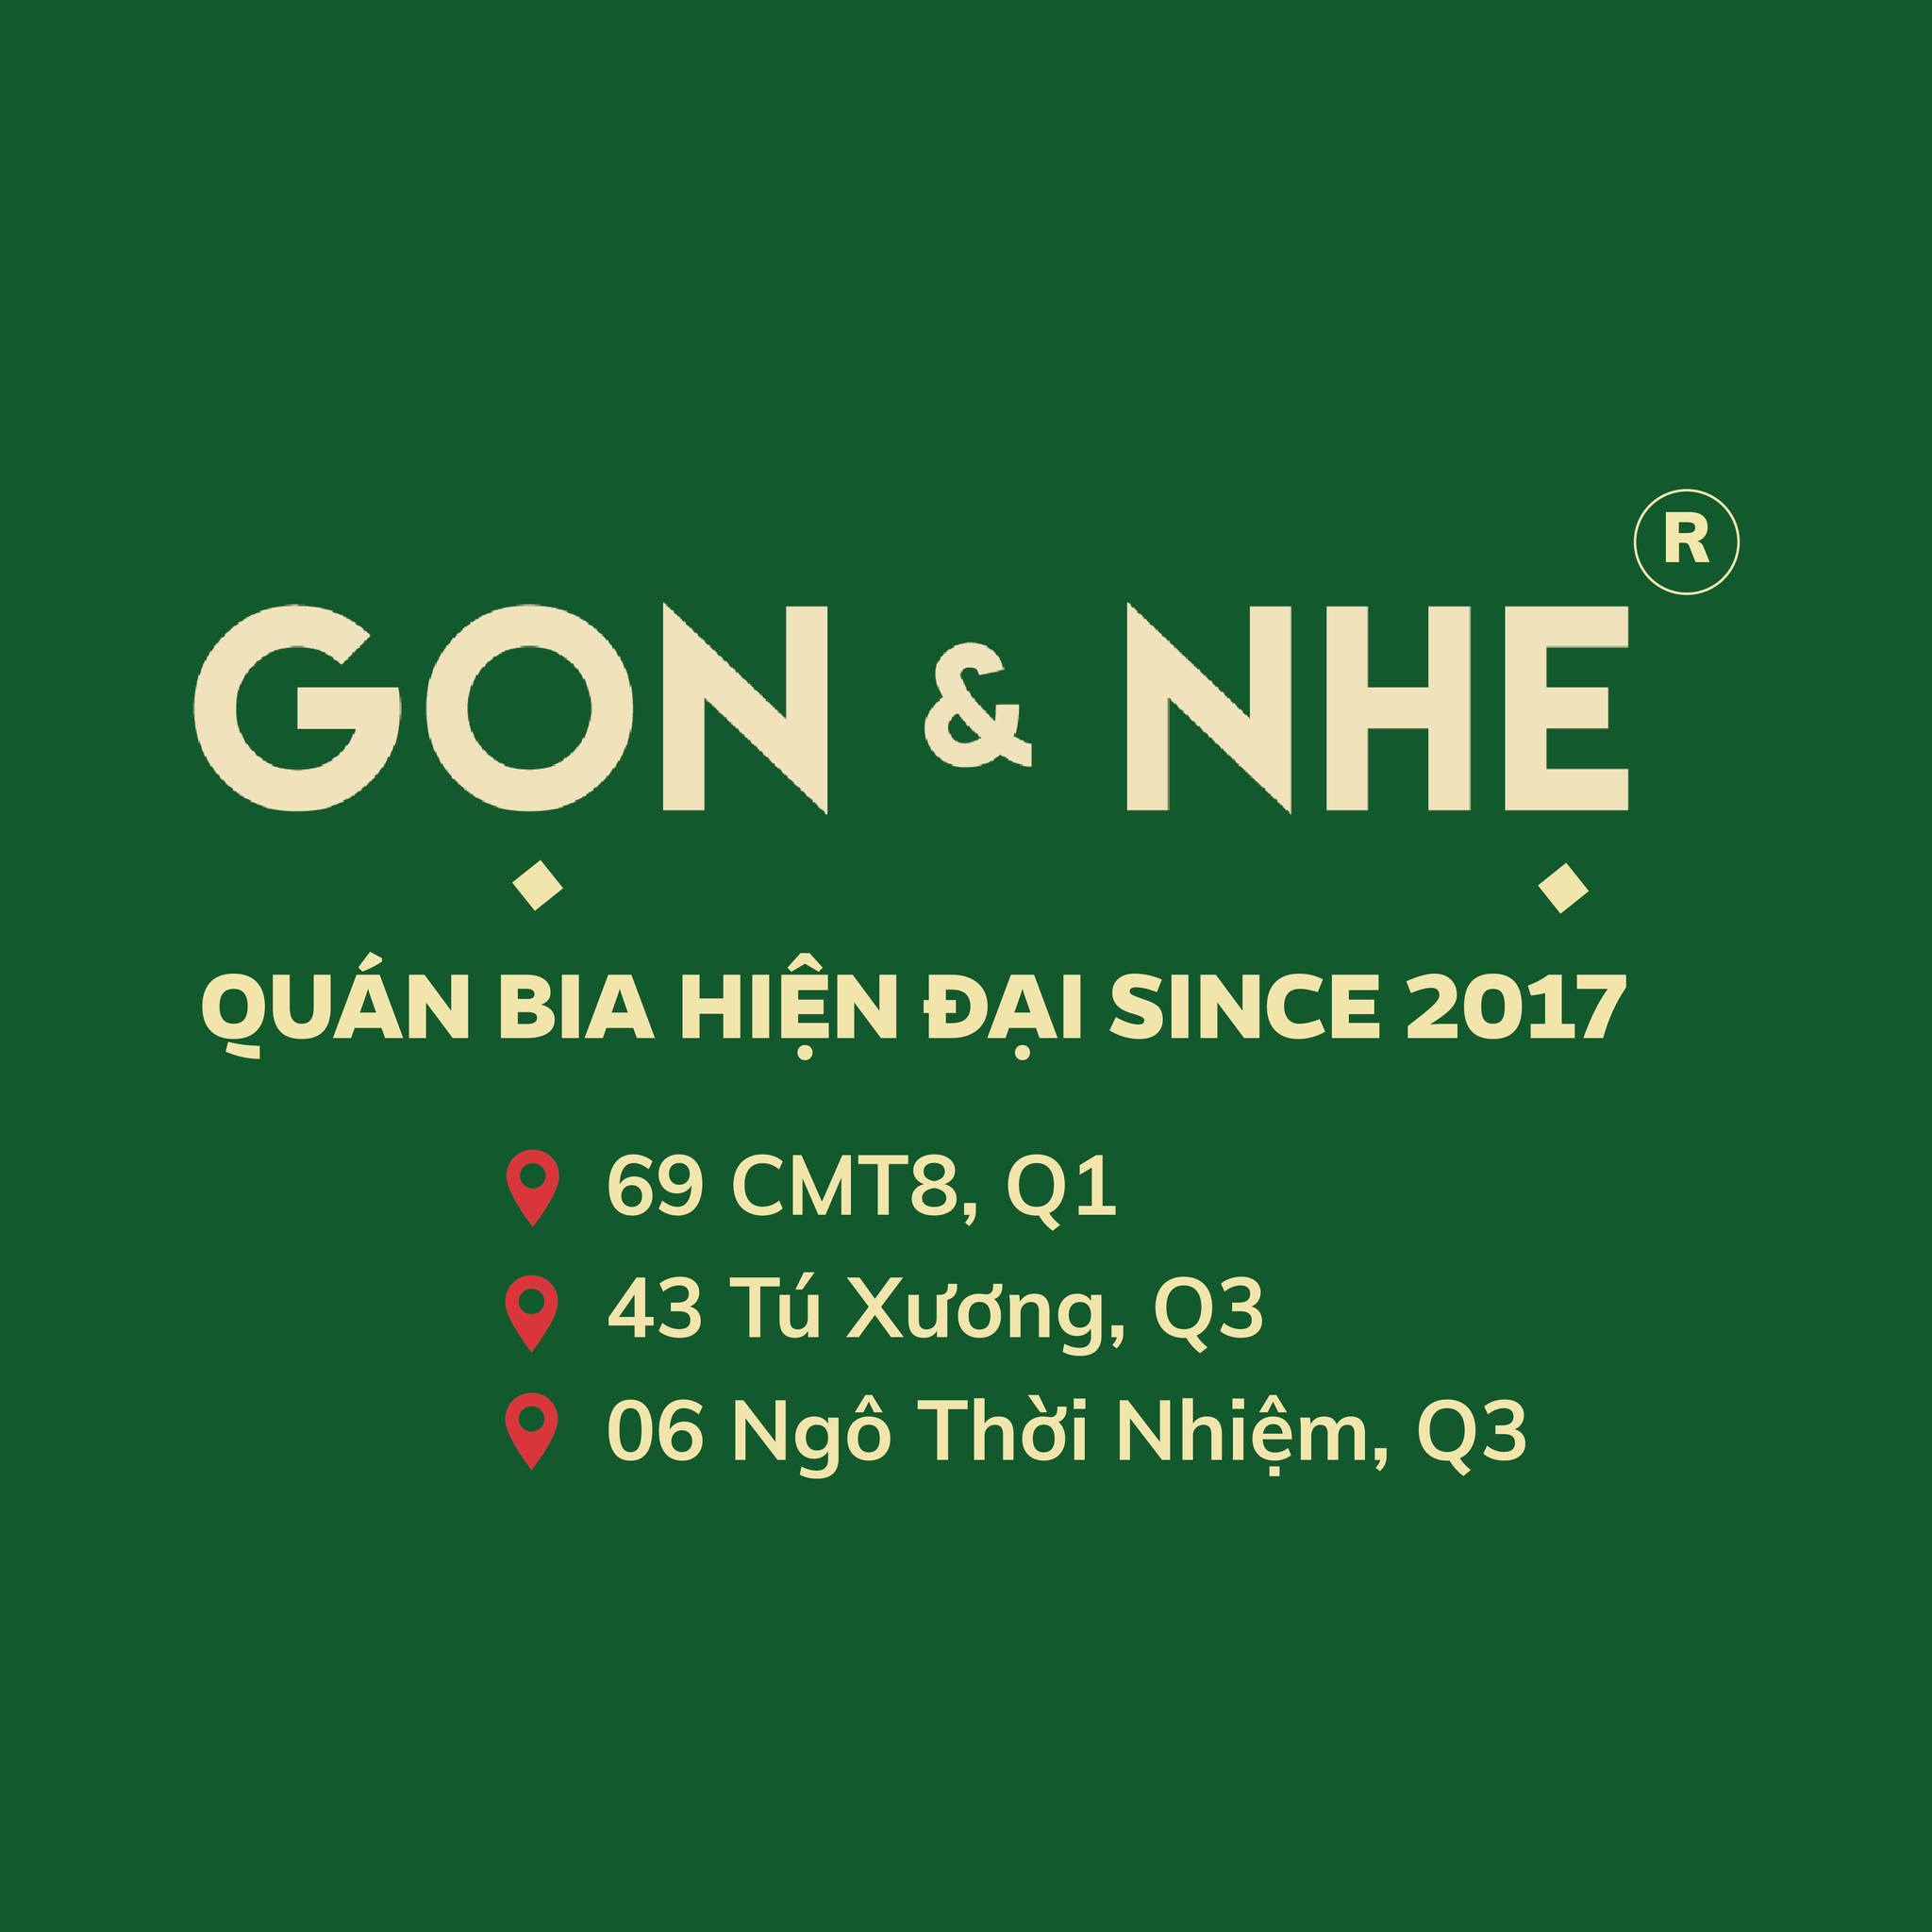 SỐT ME CHUA NGỌT DH